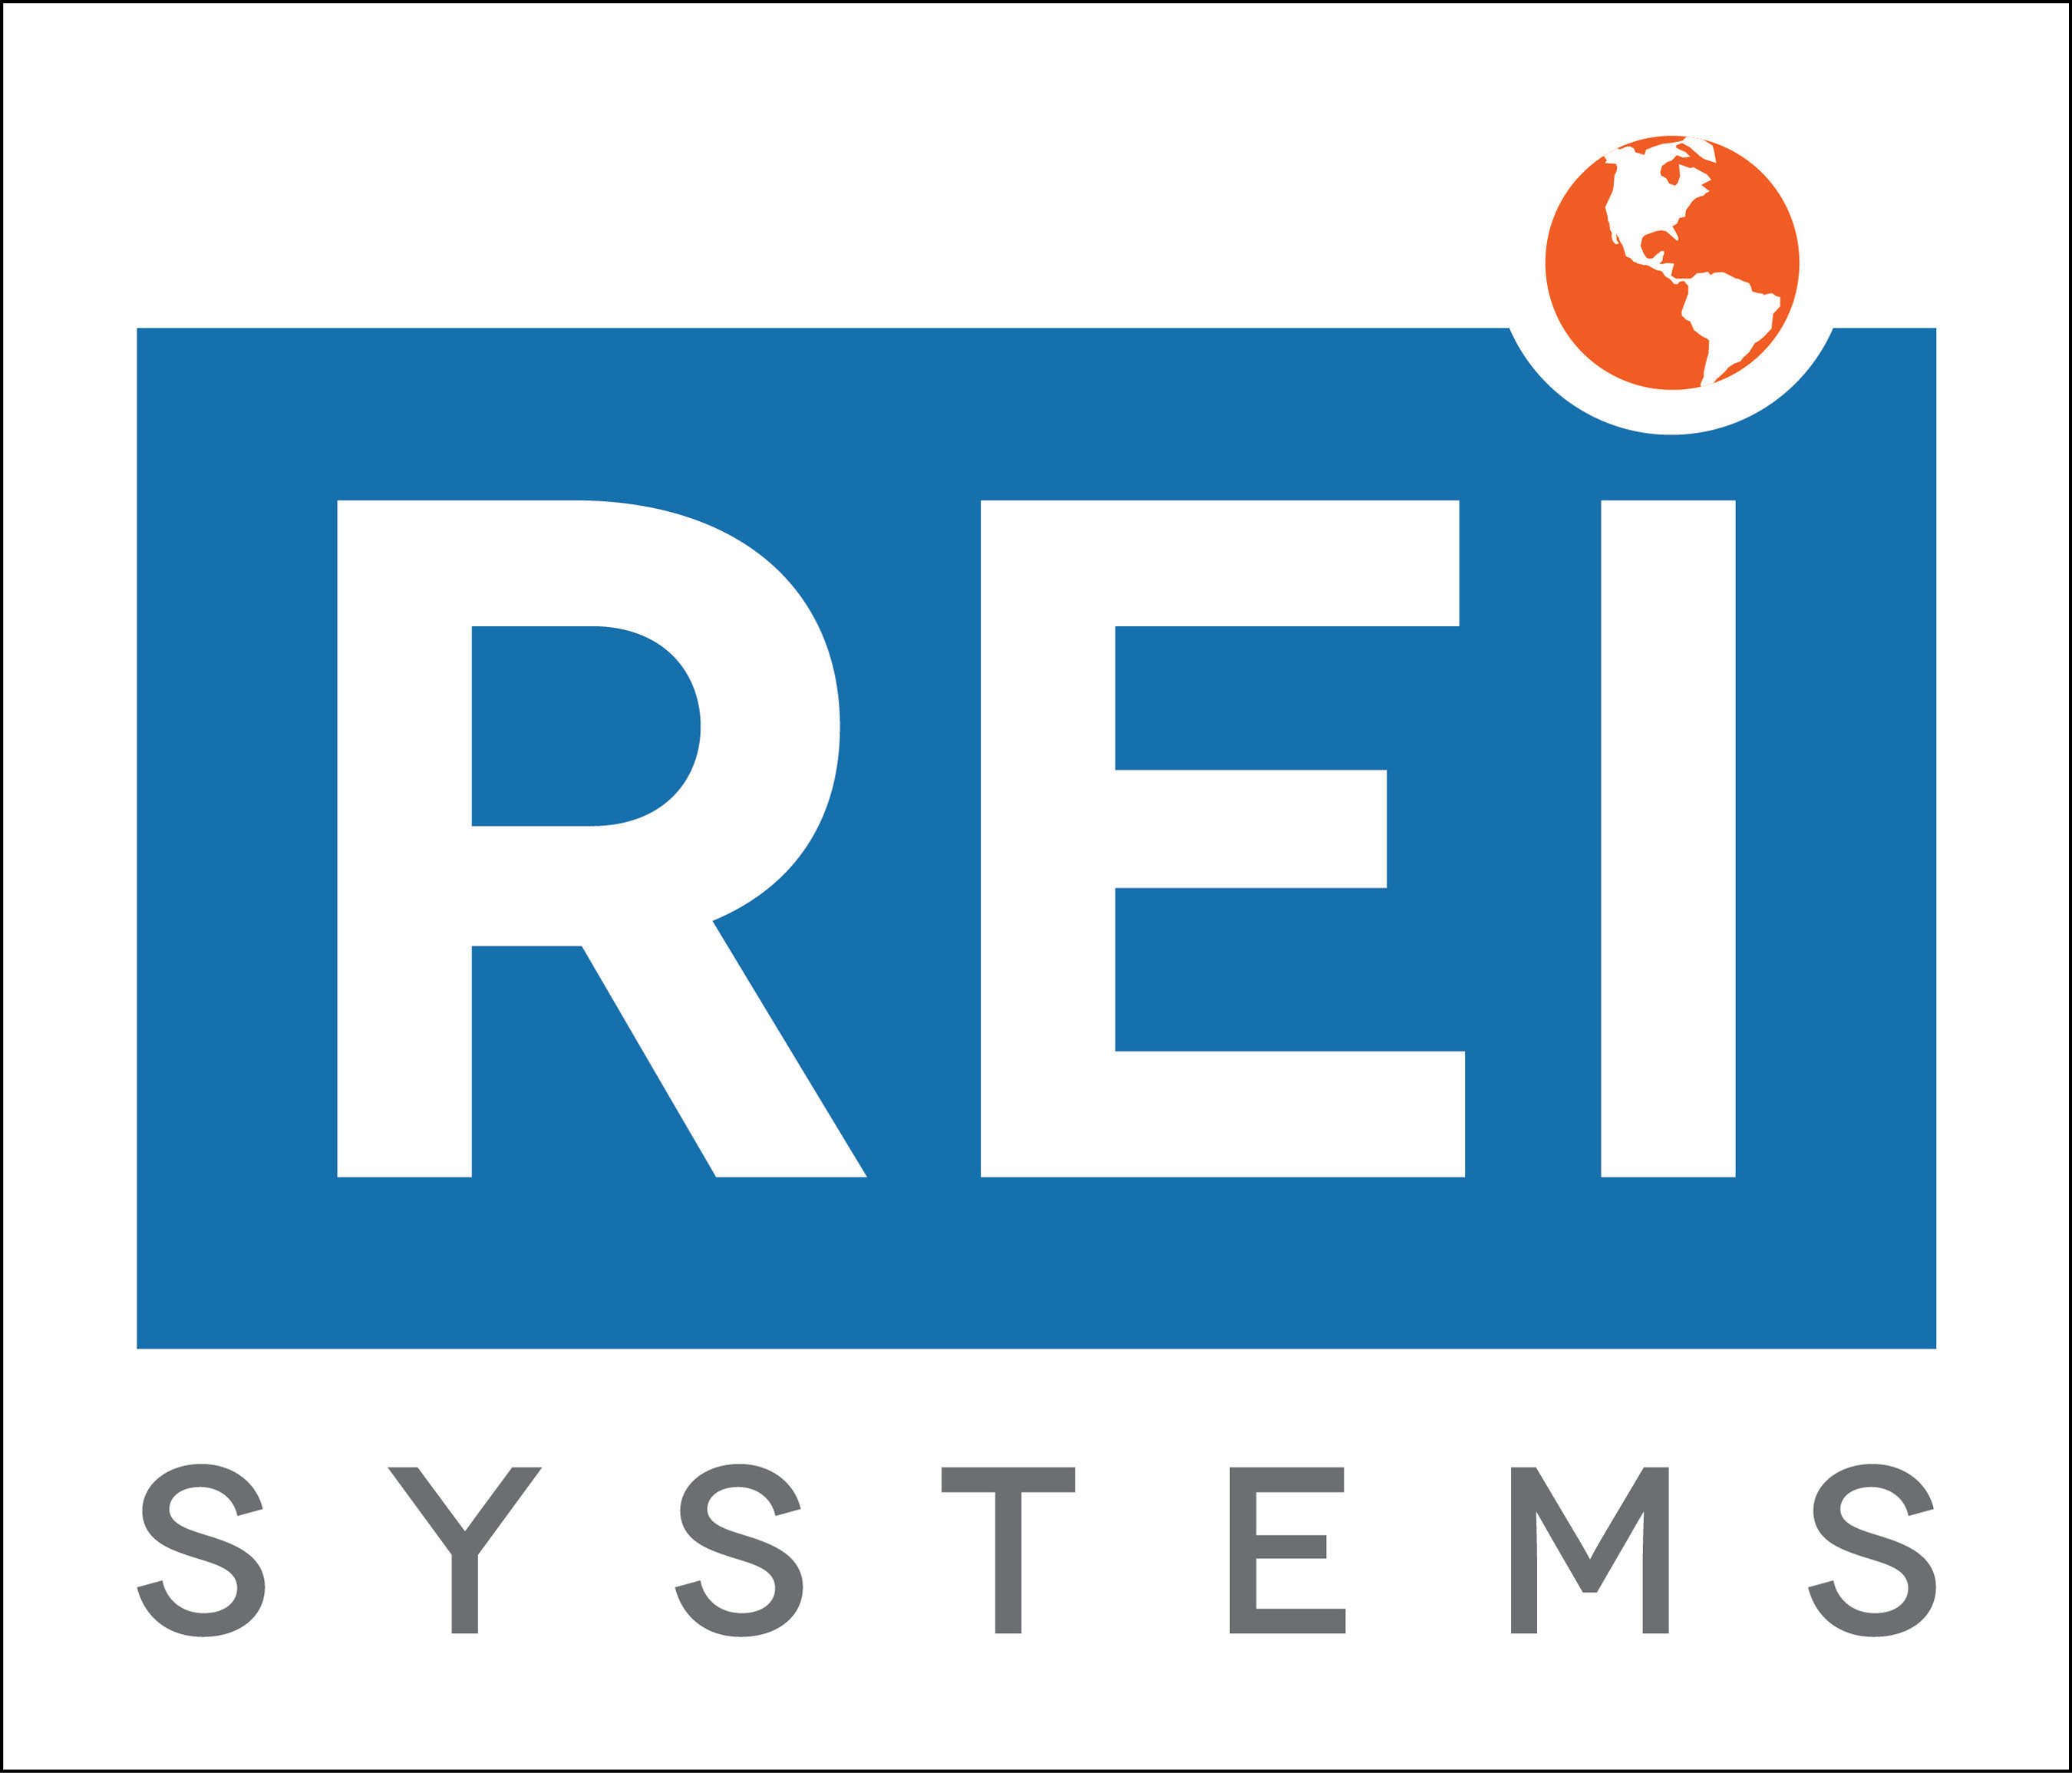 REI Systems is a leading provider of advanced web-based technologies and software solutions. We offer full life-cycle grants management, customer relationship management, and tools to generate data analytics and visualizations. REI delivers reliable, effective, and innovative solutions by partnering with our customers to address today's complex business challenges. (PRNewsFoto/REI Systems) (PRNewsFoto/)